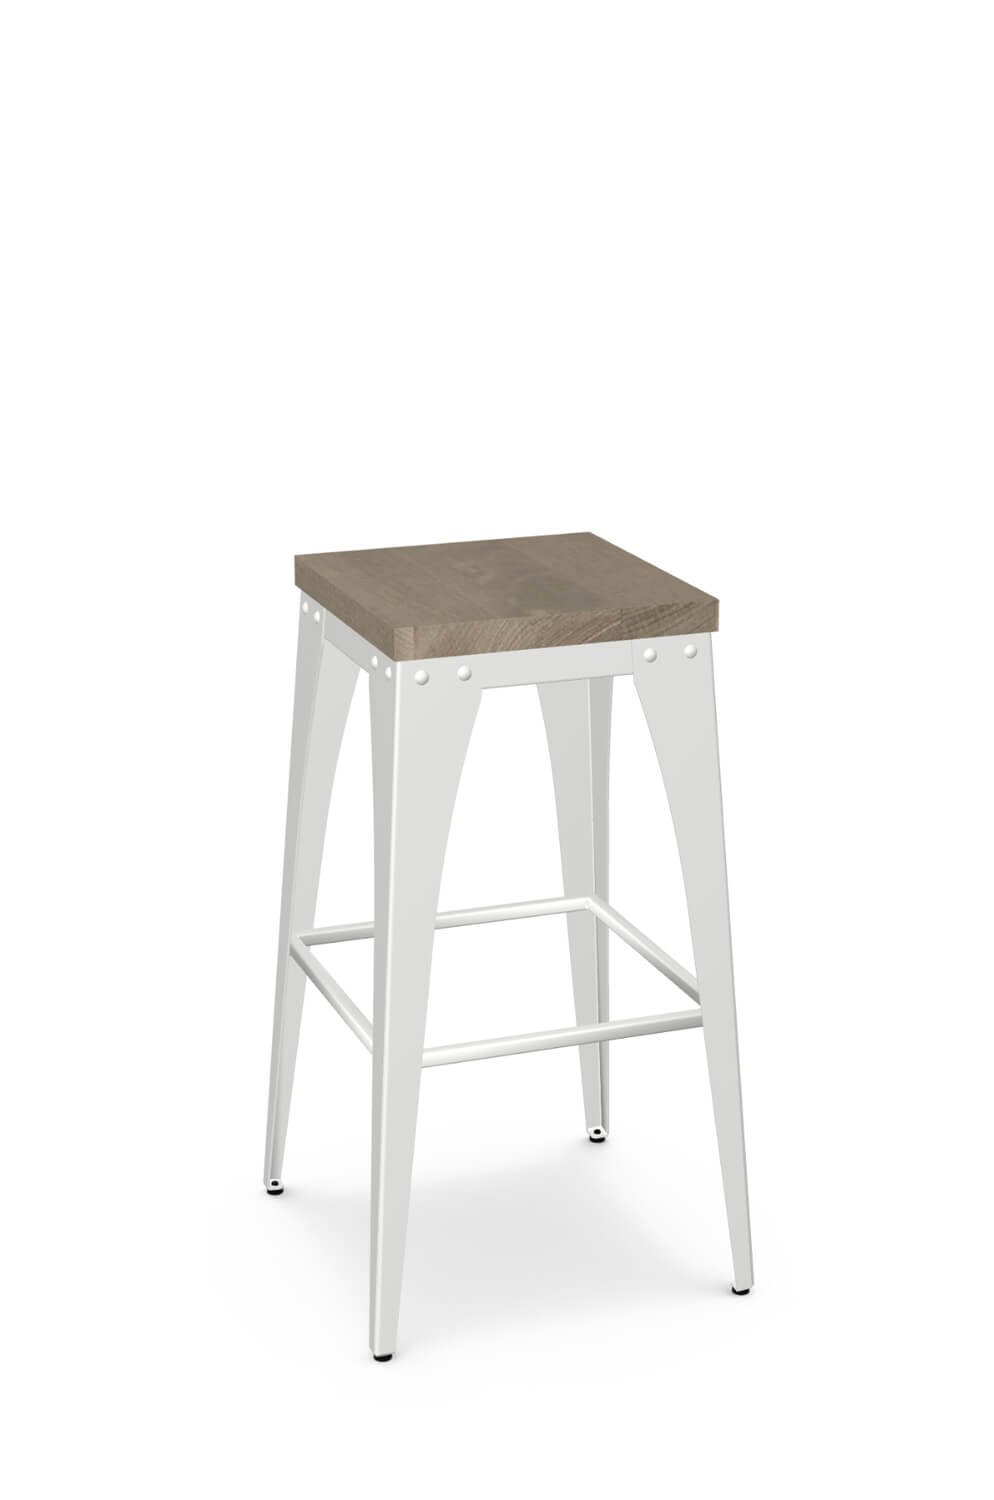 Amisco's Upright Modern Metal Backless Bar Stool with Natural Wood Seat